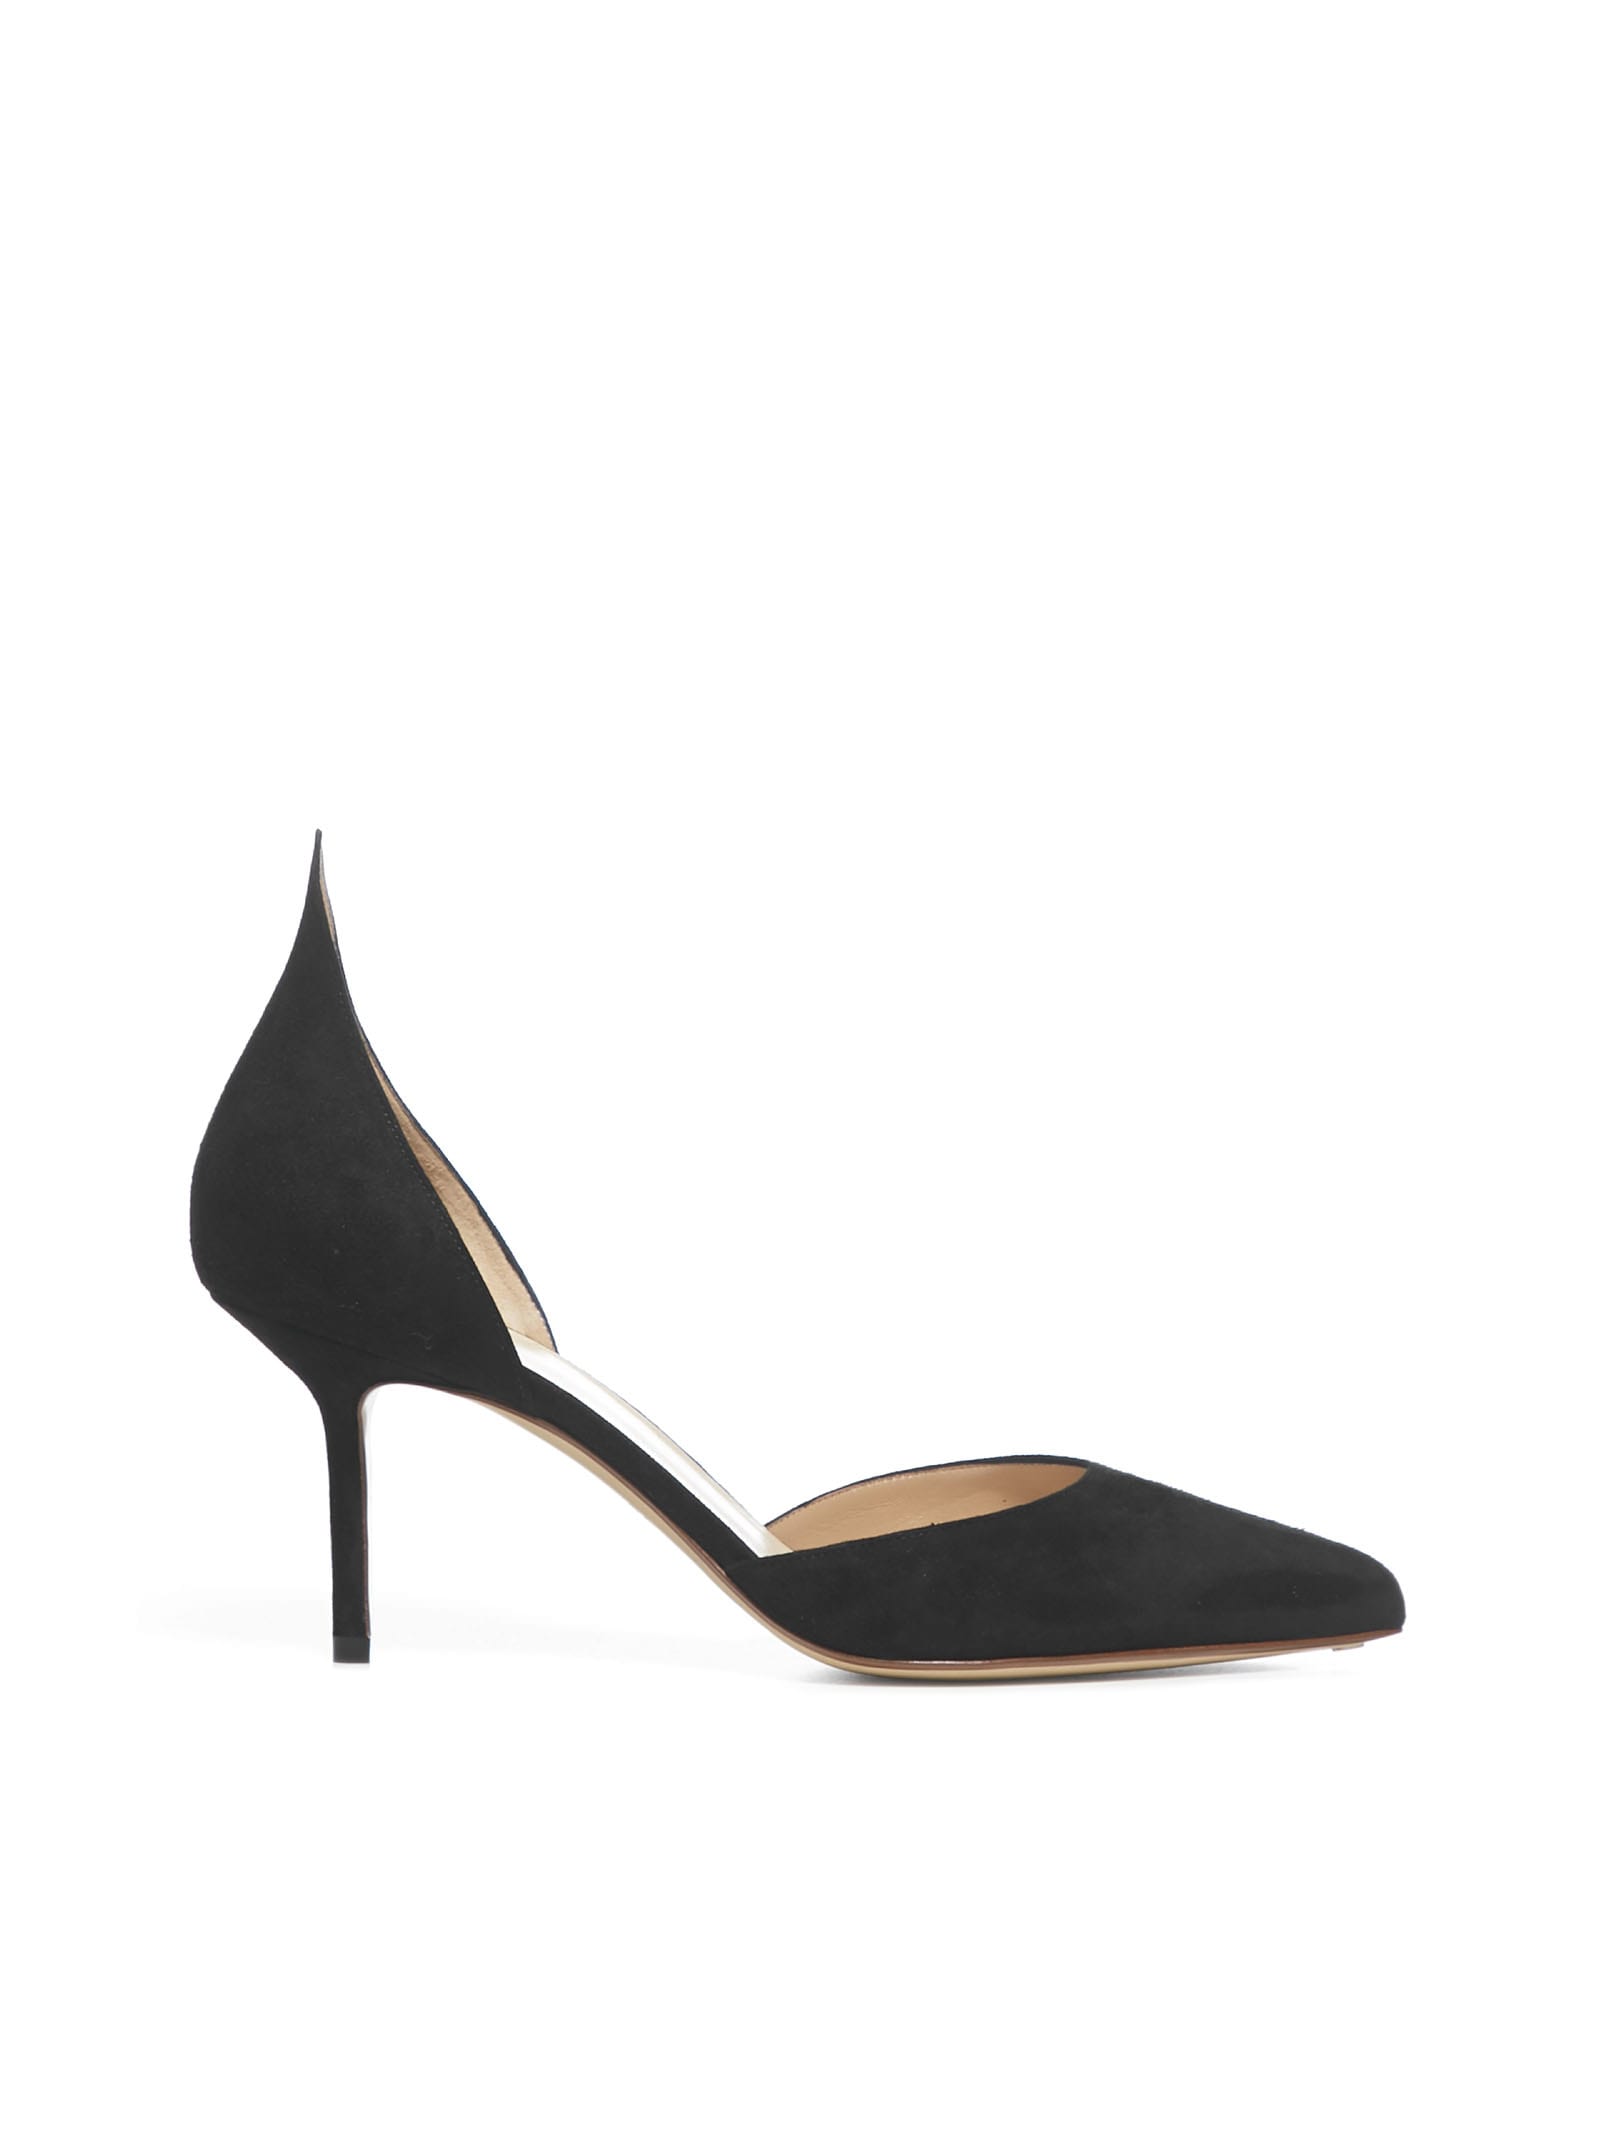 Buy Francesco Russo 75 Mm High-heeled Shoe online, shop Francesco Russo shoes with free shipping